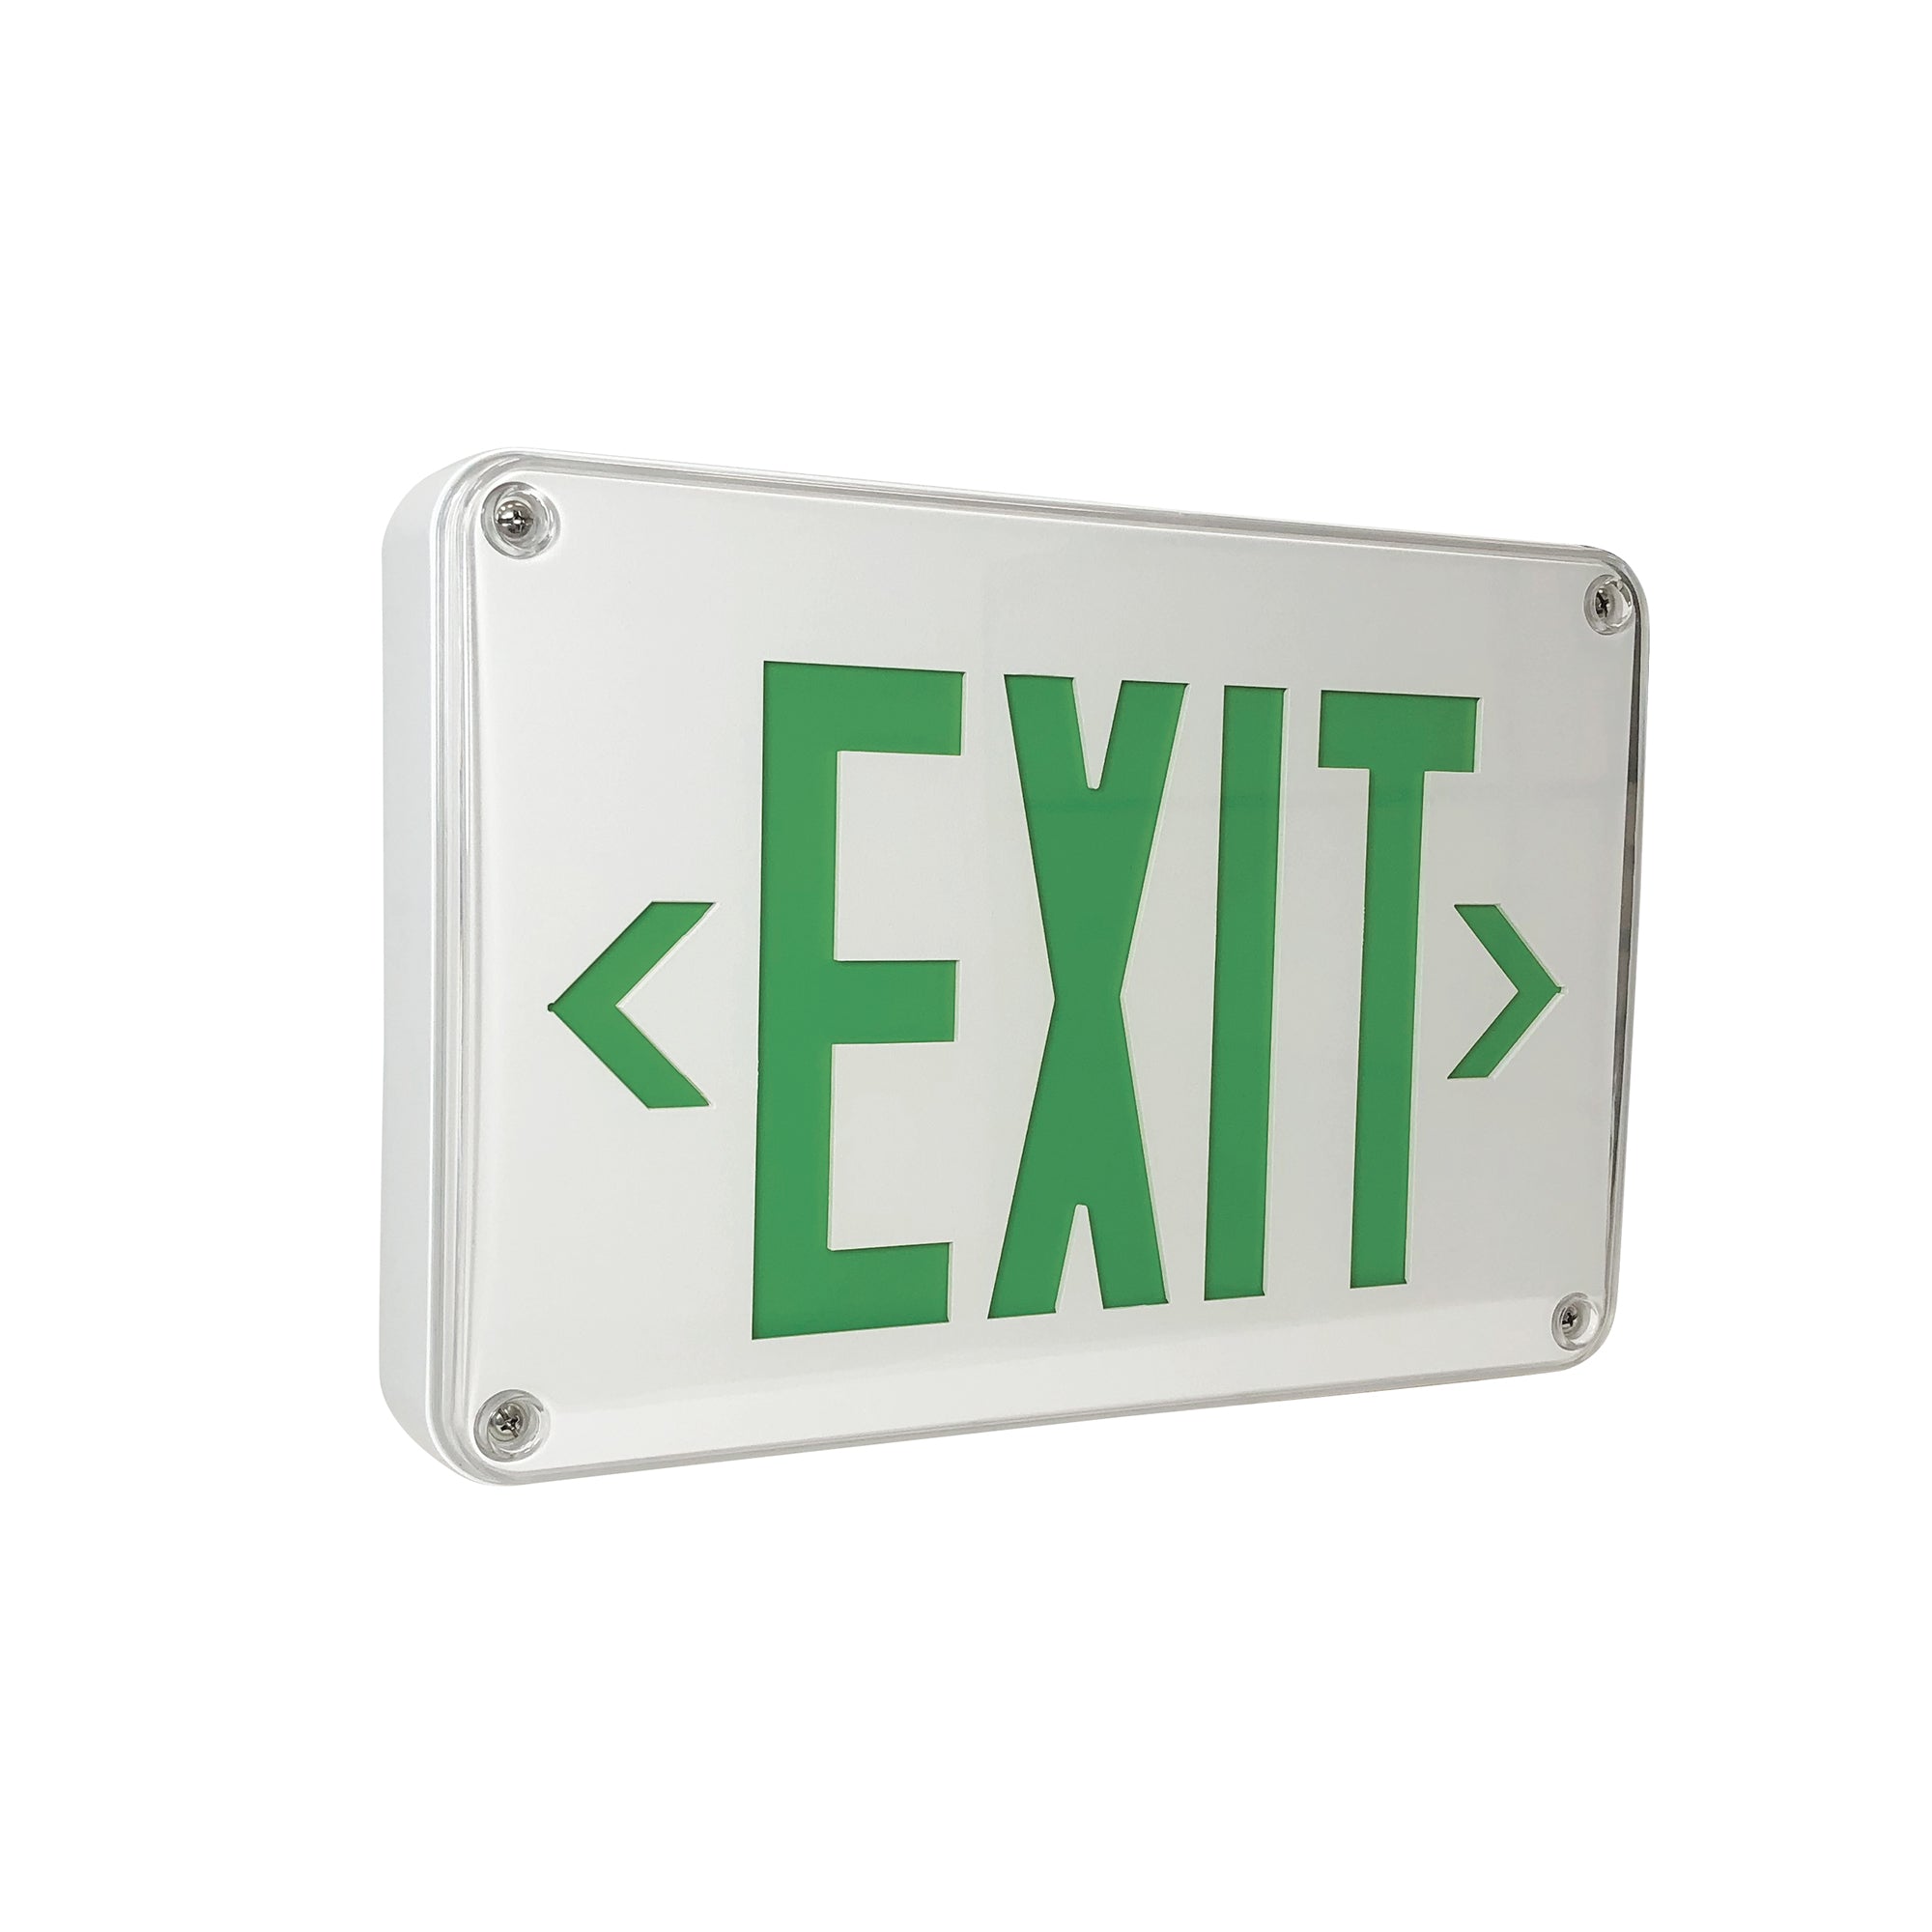 Nora Lighting NX-617-LED/G-CC - Exit / Emergency - LED Self-Diagnostic Wet/Cold Location Exit Sign w/ Battery Backup, White Housing w/ 6 Inch Green Letters